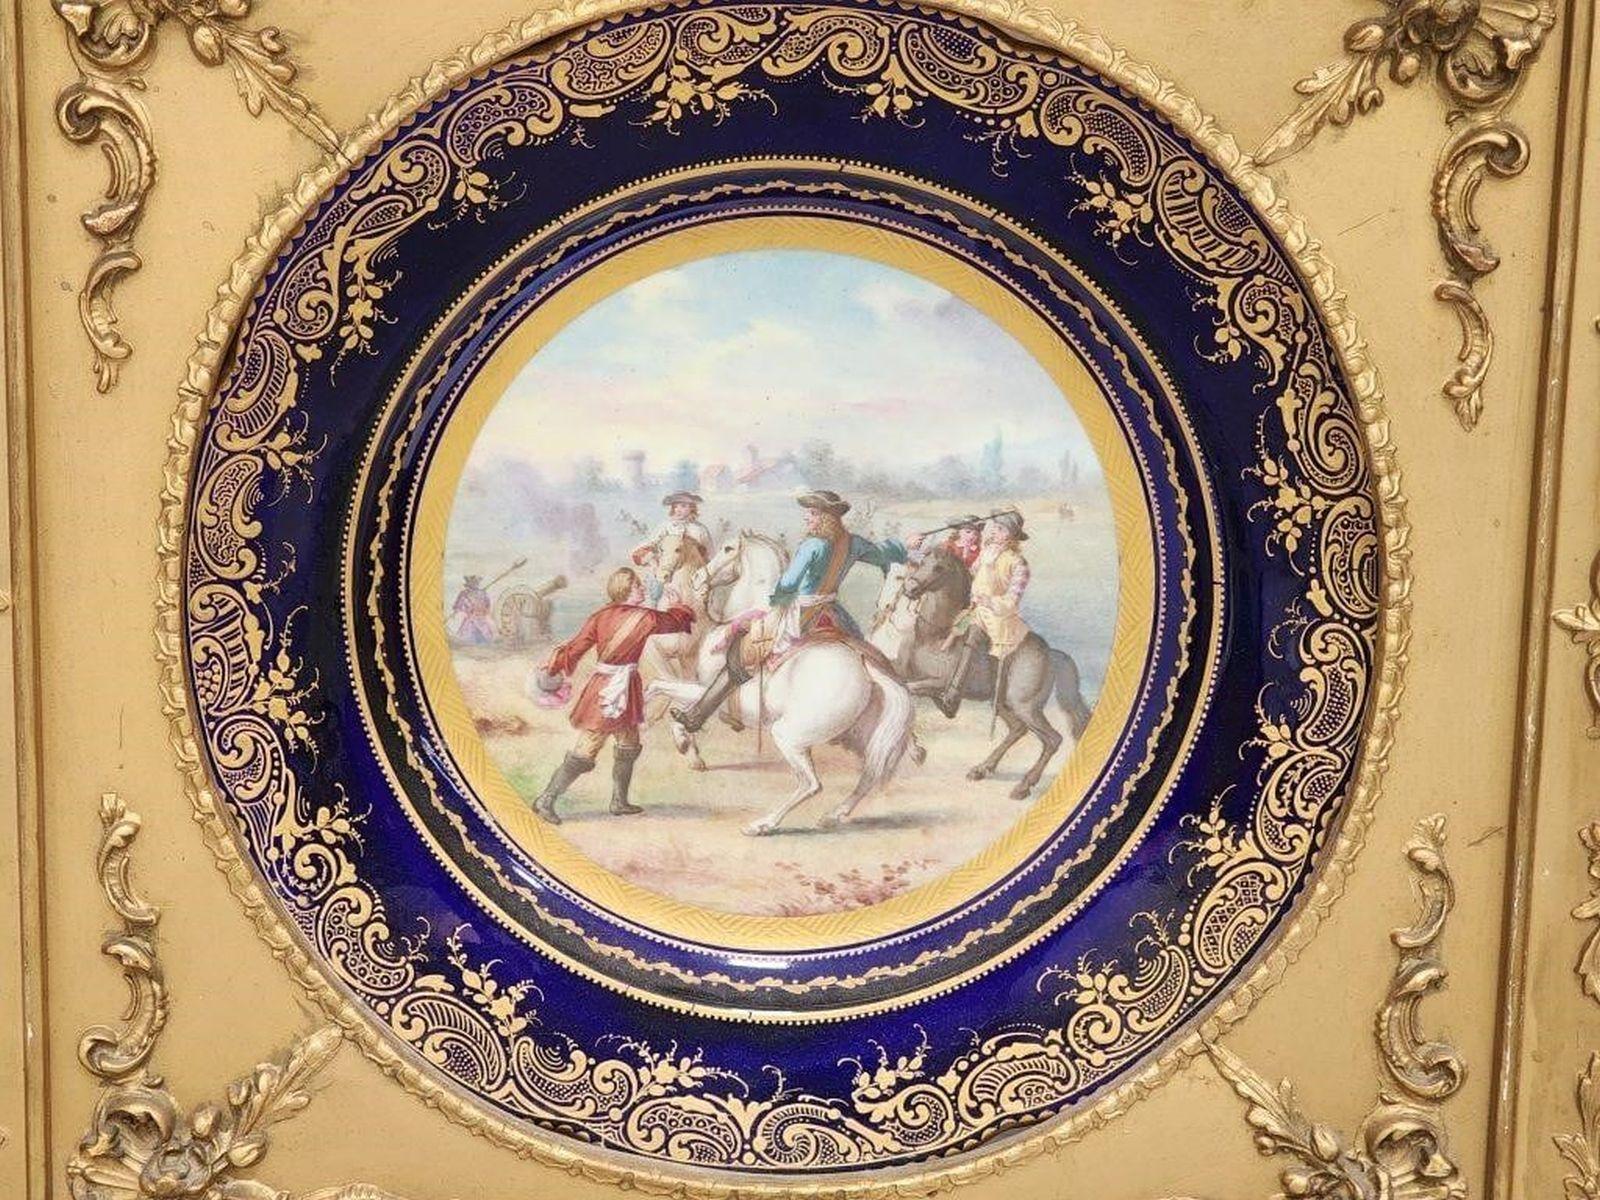 Antique French Hand Painted Sevres Plate in Frame. There is a connected chain for hanging. This is a a custom-made gilt wood frame with ornate design. measures approx - 15.5 x 15.5
